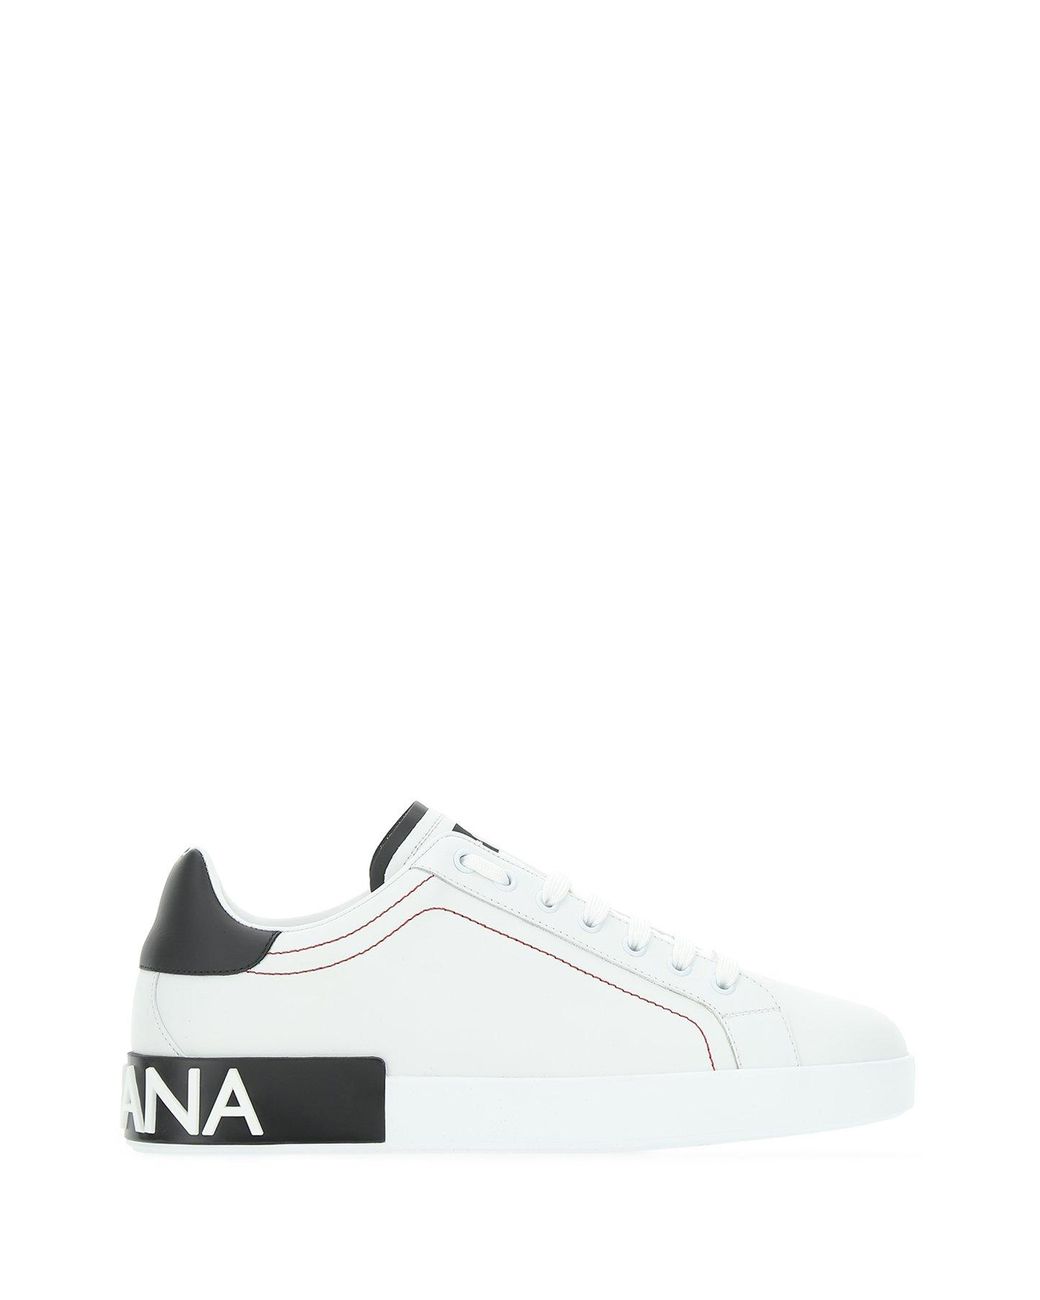 Dolce & Gabbana Leather Low Top Sneakers in White for Men - Lyst